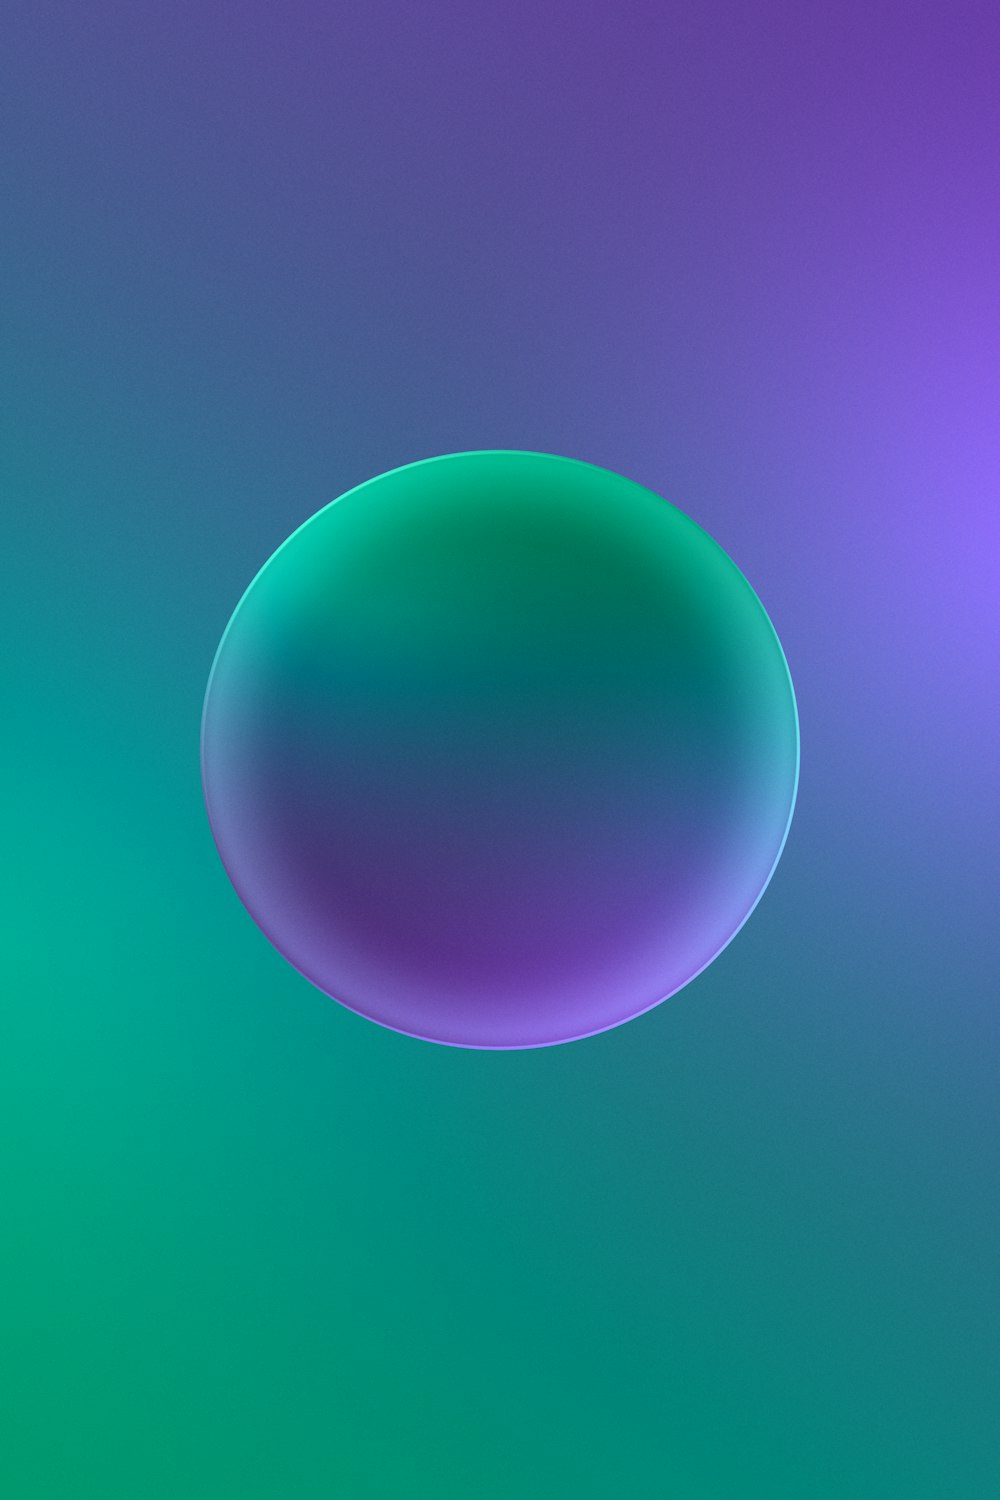 a blurry image of a blue and green bubble